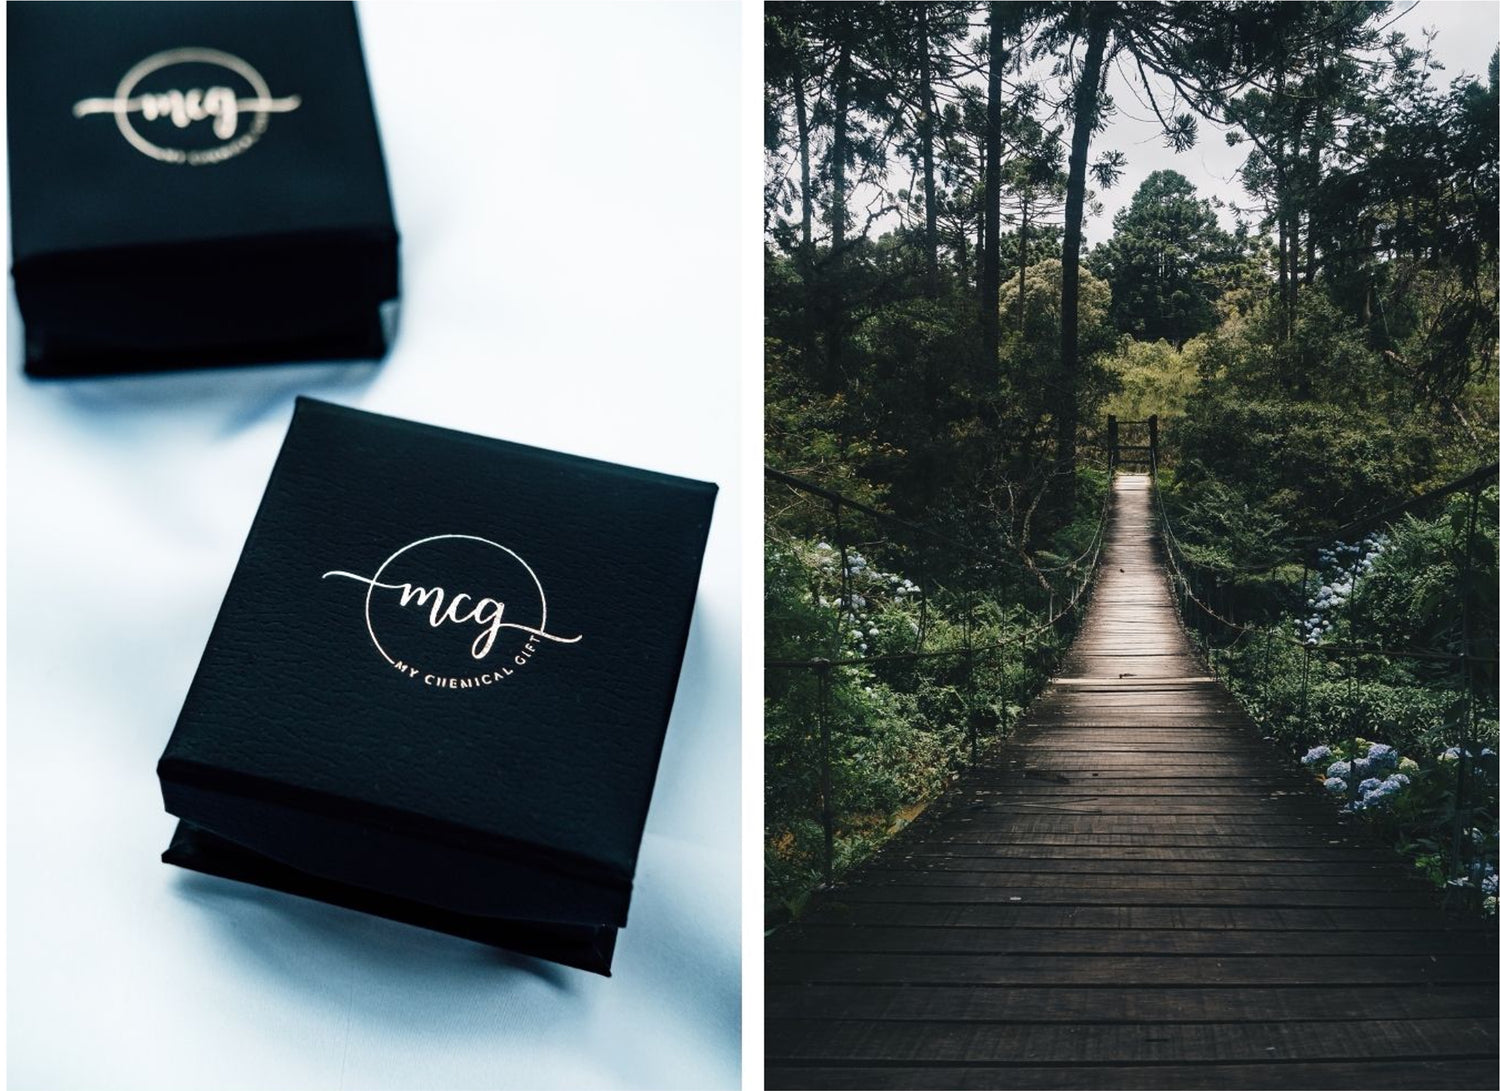 MCG packaging. Beautiful black box with gold logo. 100% recycled packaging.